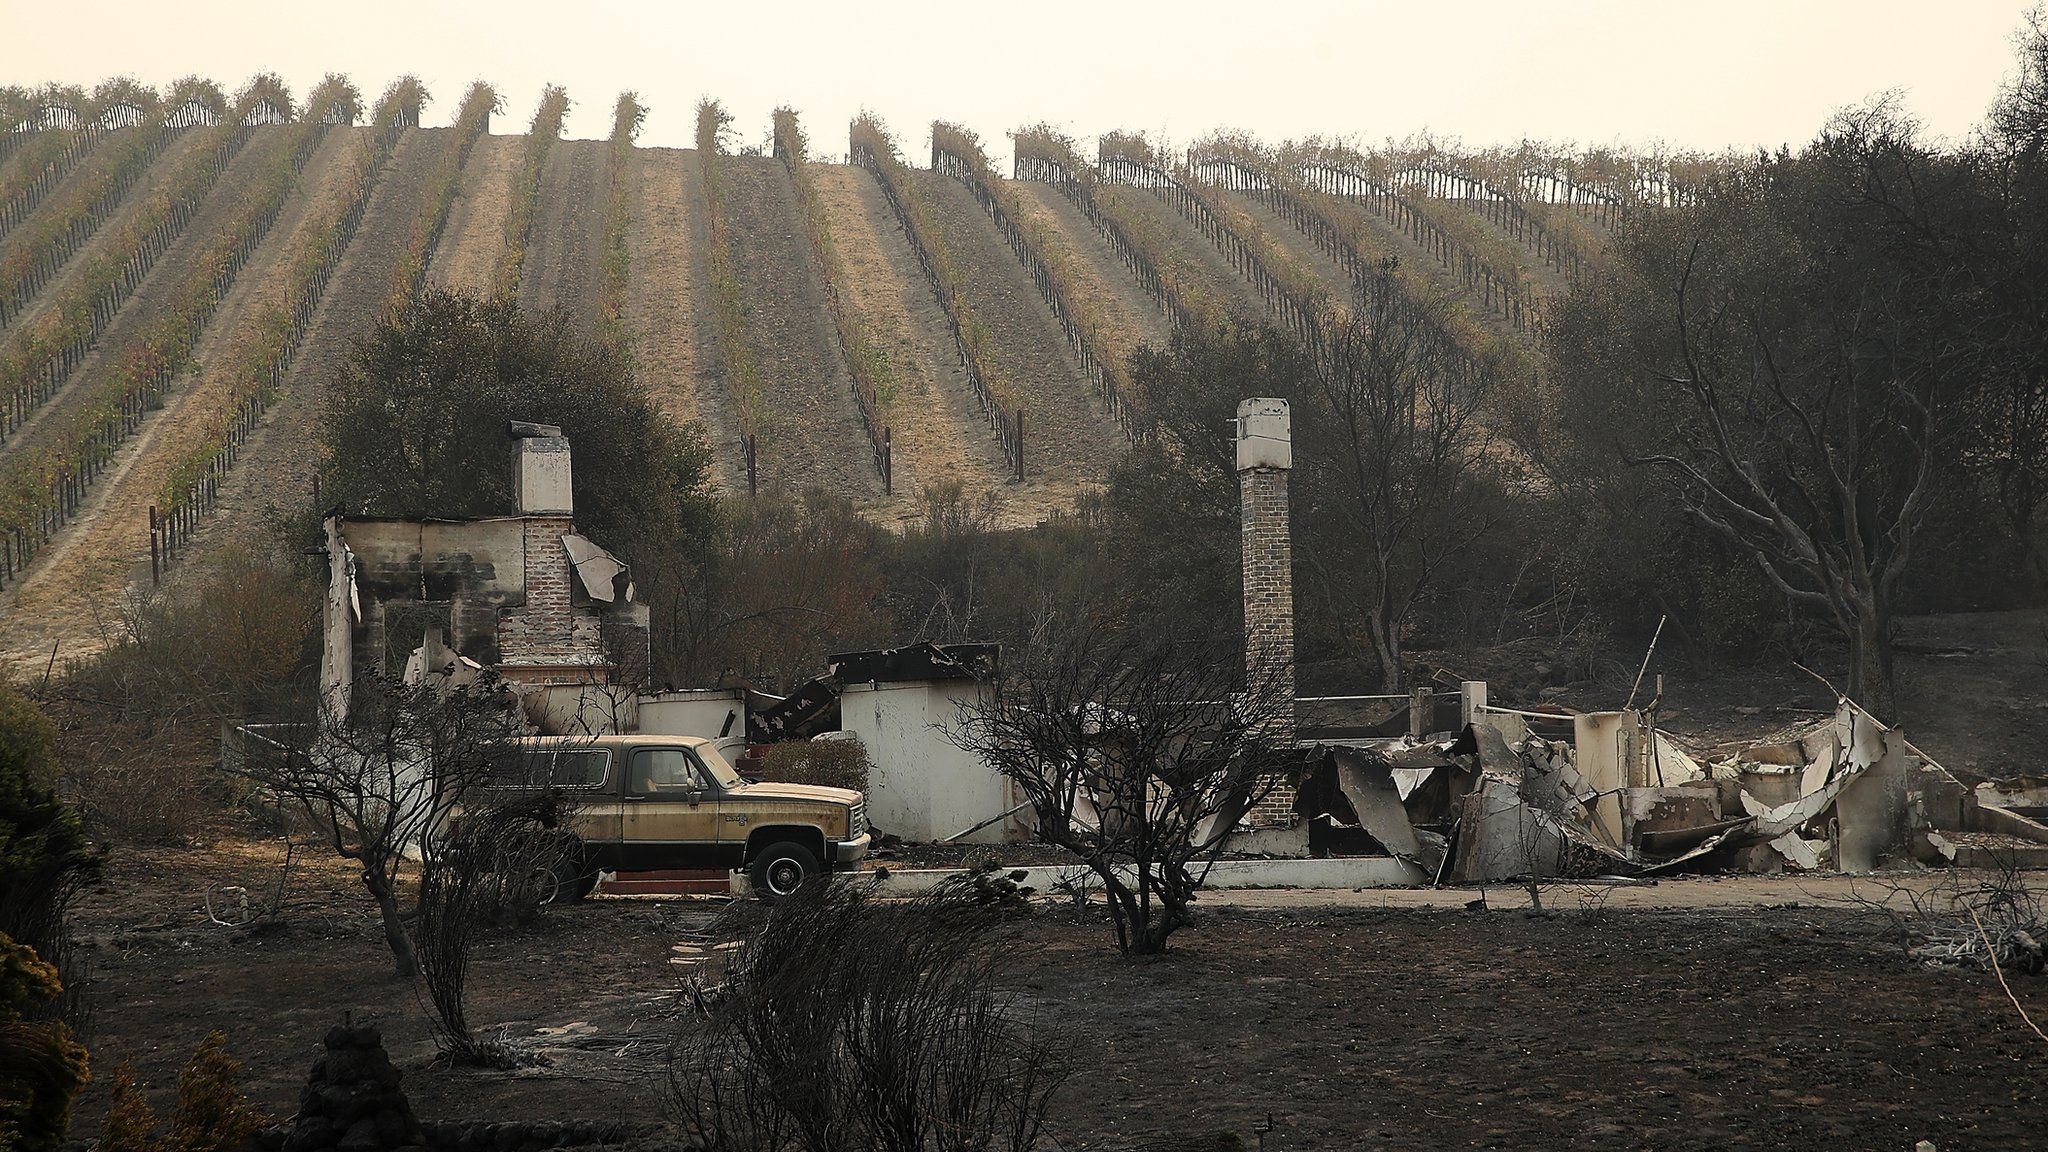 A burned out home sits next a vineyard after an out of control wildfire moved through the area on October 9, 2017 in Sonoma, California. Tens of thousands of acres and dozens of homes and businesses have burned in widespread wildfires that are burning in Napa and Sonoma counties.